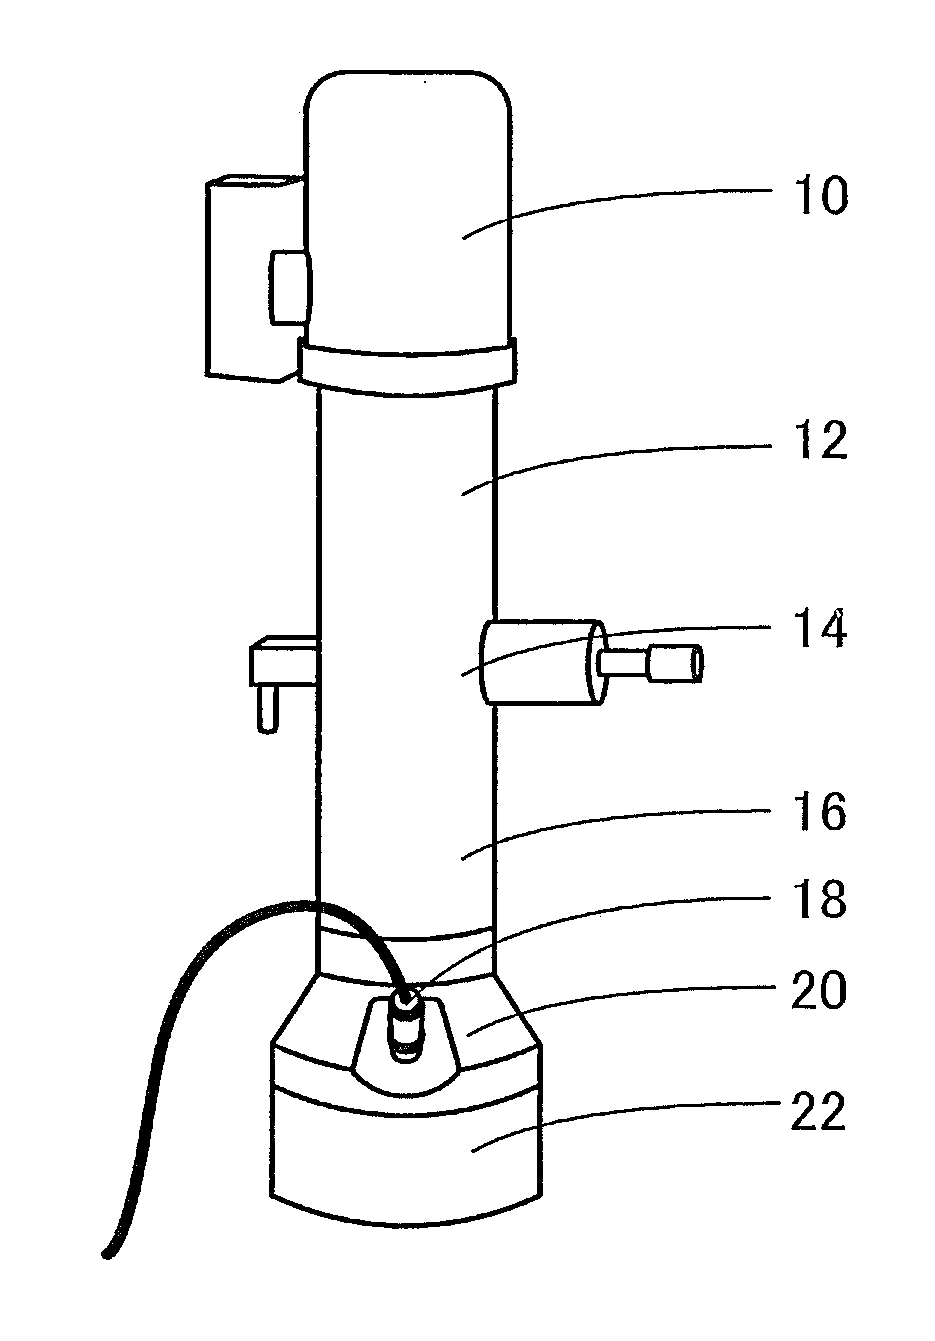 Transmission electron diffraction measurement apparatus and method for measuring transmission electron diffraction pattern